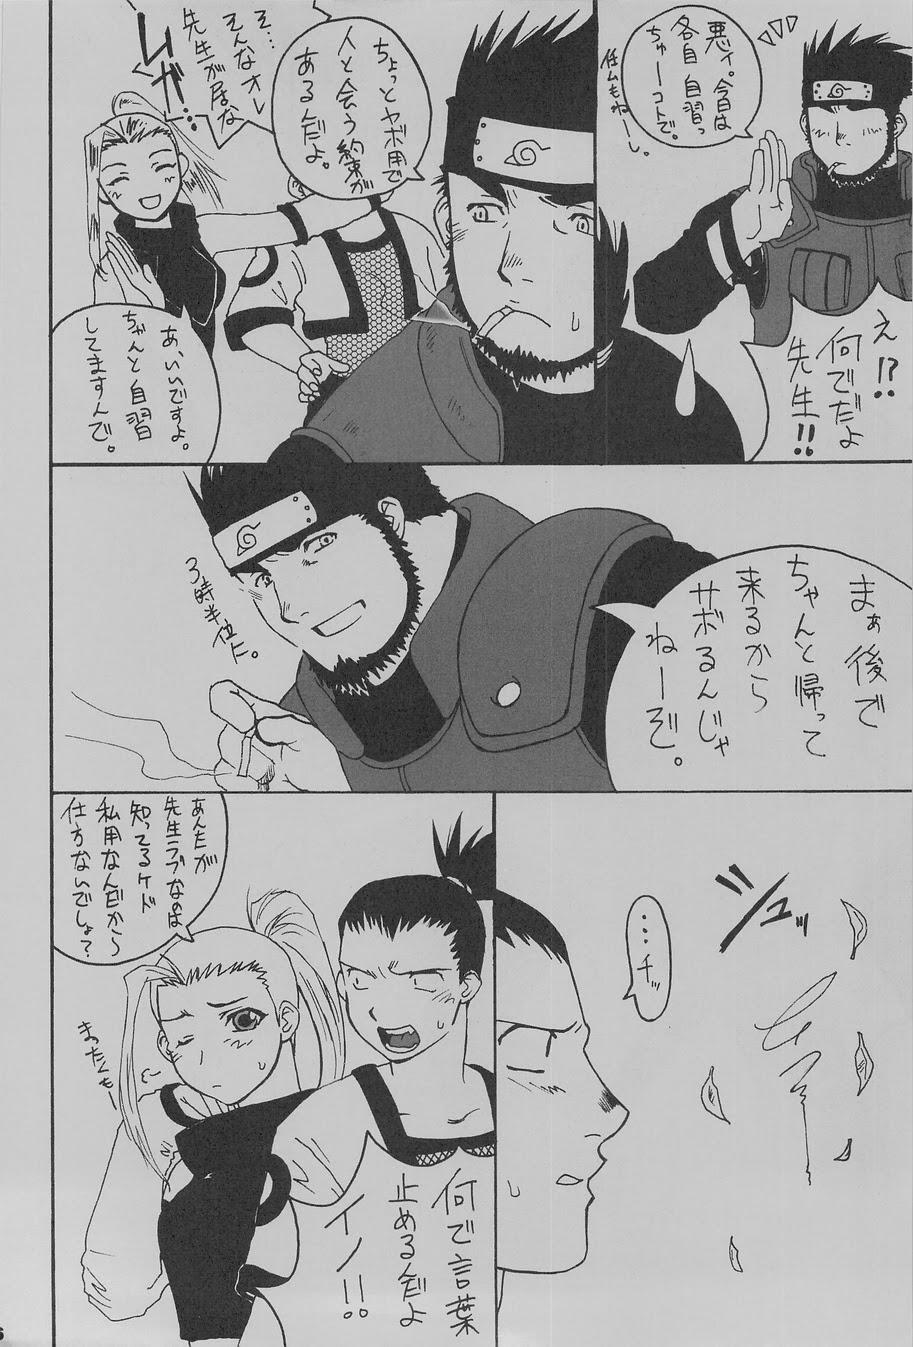 Little Ka - it happened in the distant past - Naruto Fullmetal alchemist Gunparade march Woman Fucking - Page 8